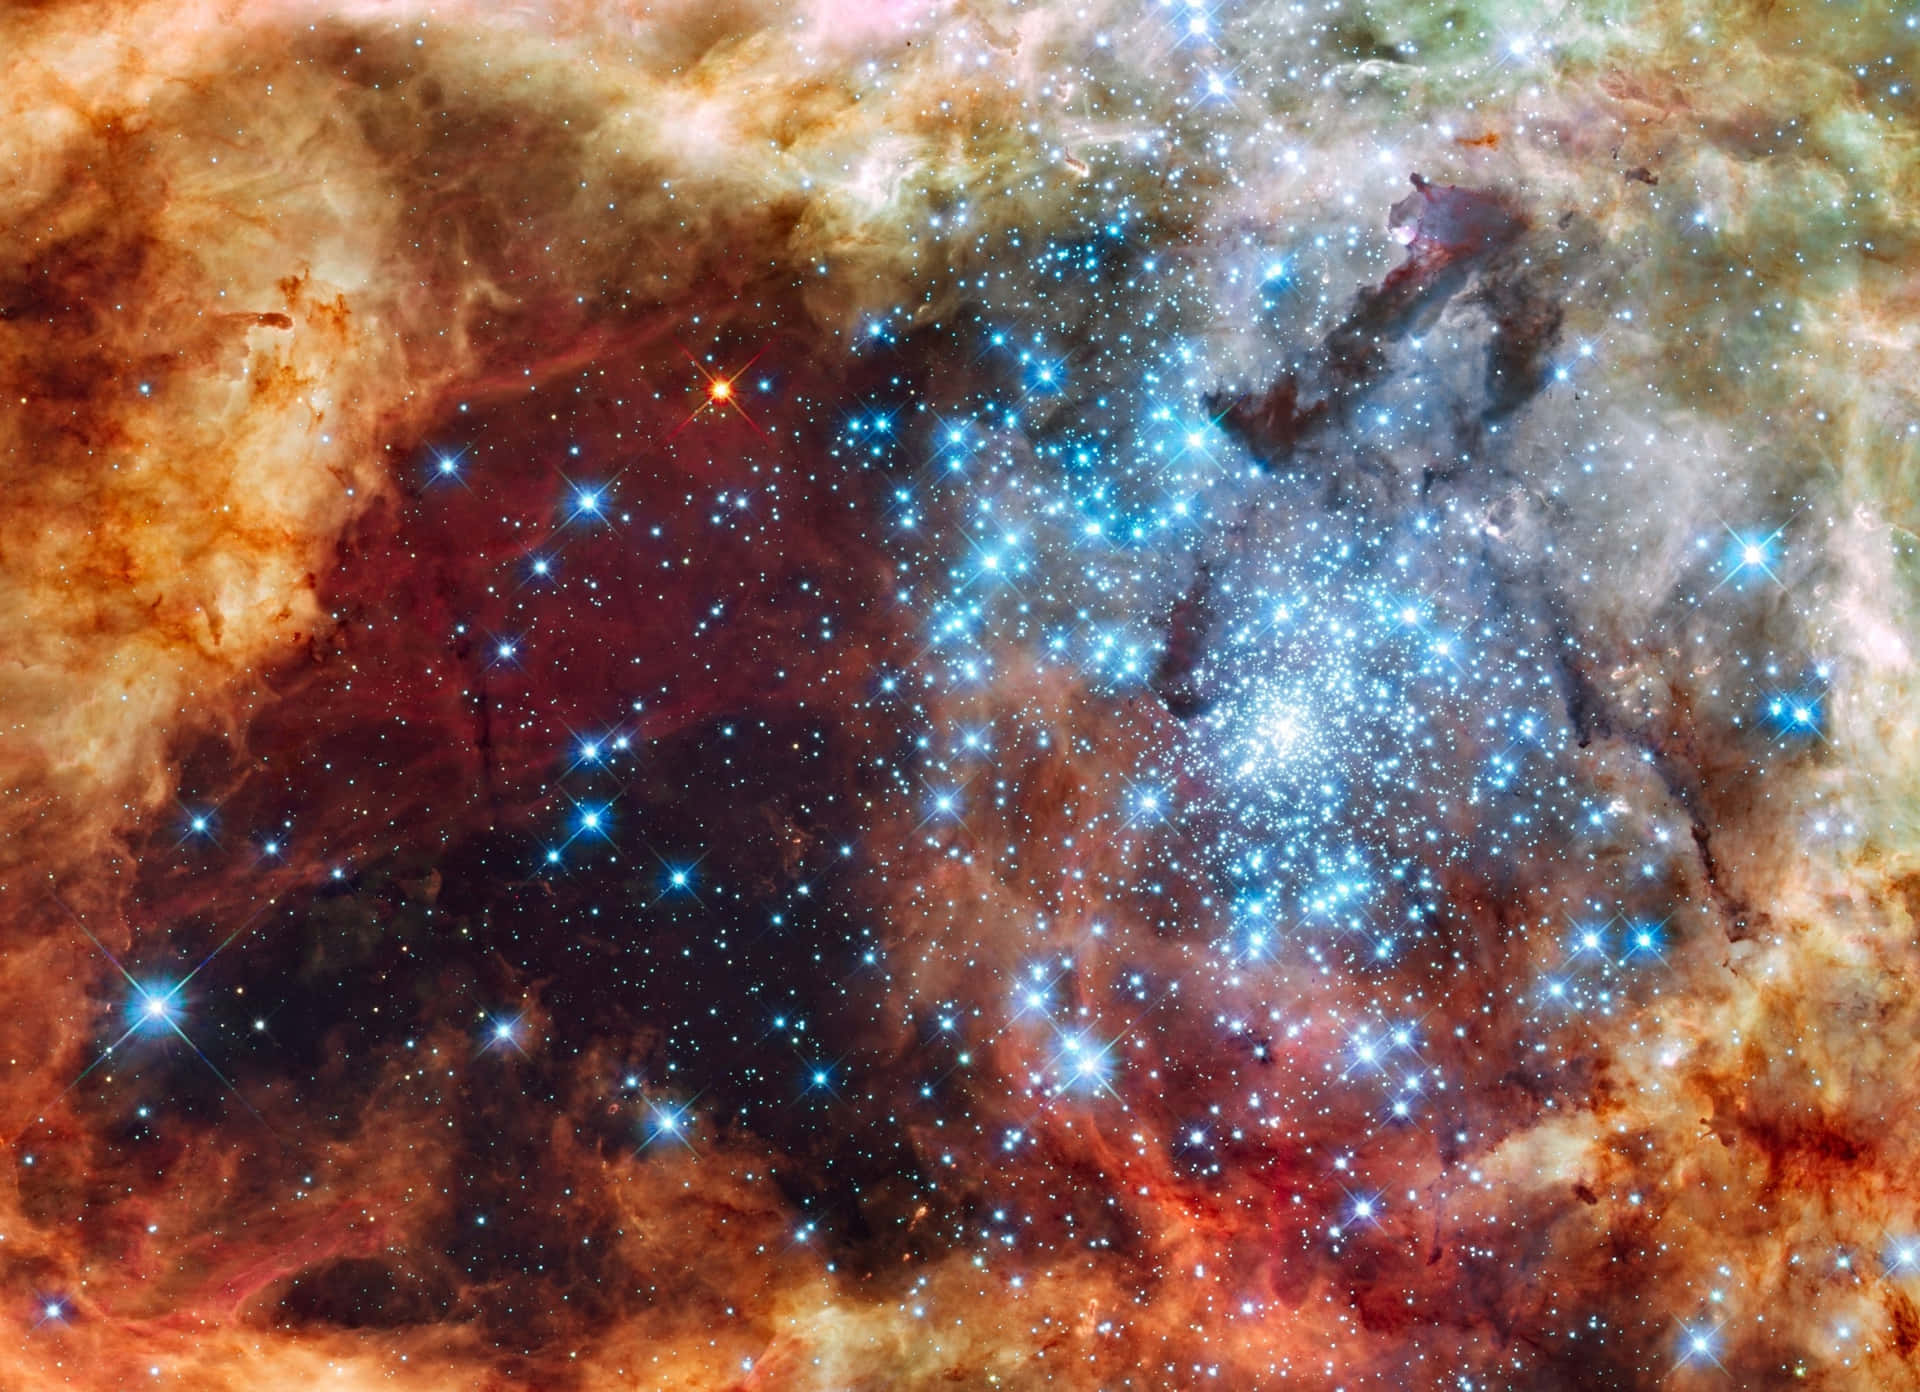 Caption: Stunning Star Cluster Formation in Deep Space Wallpaper